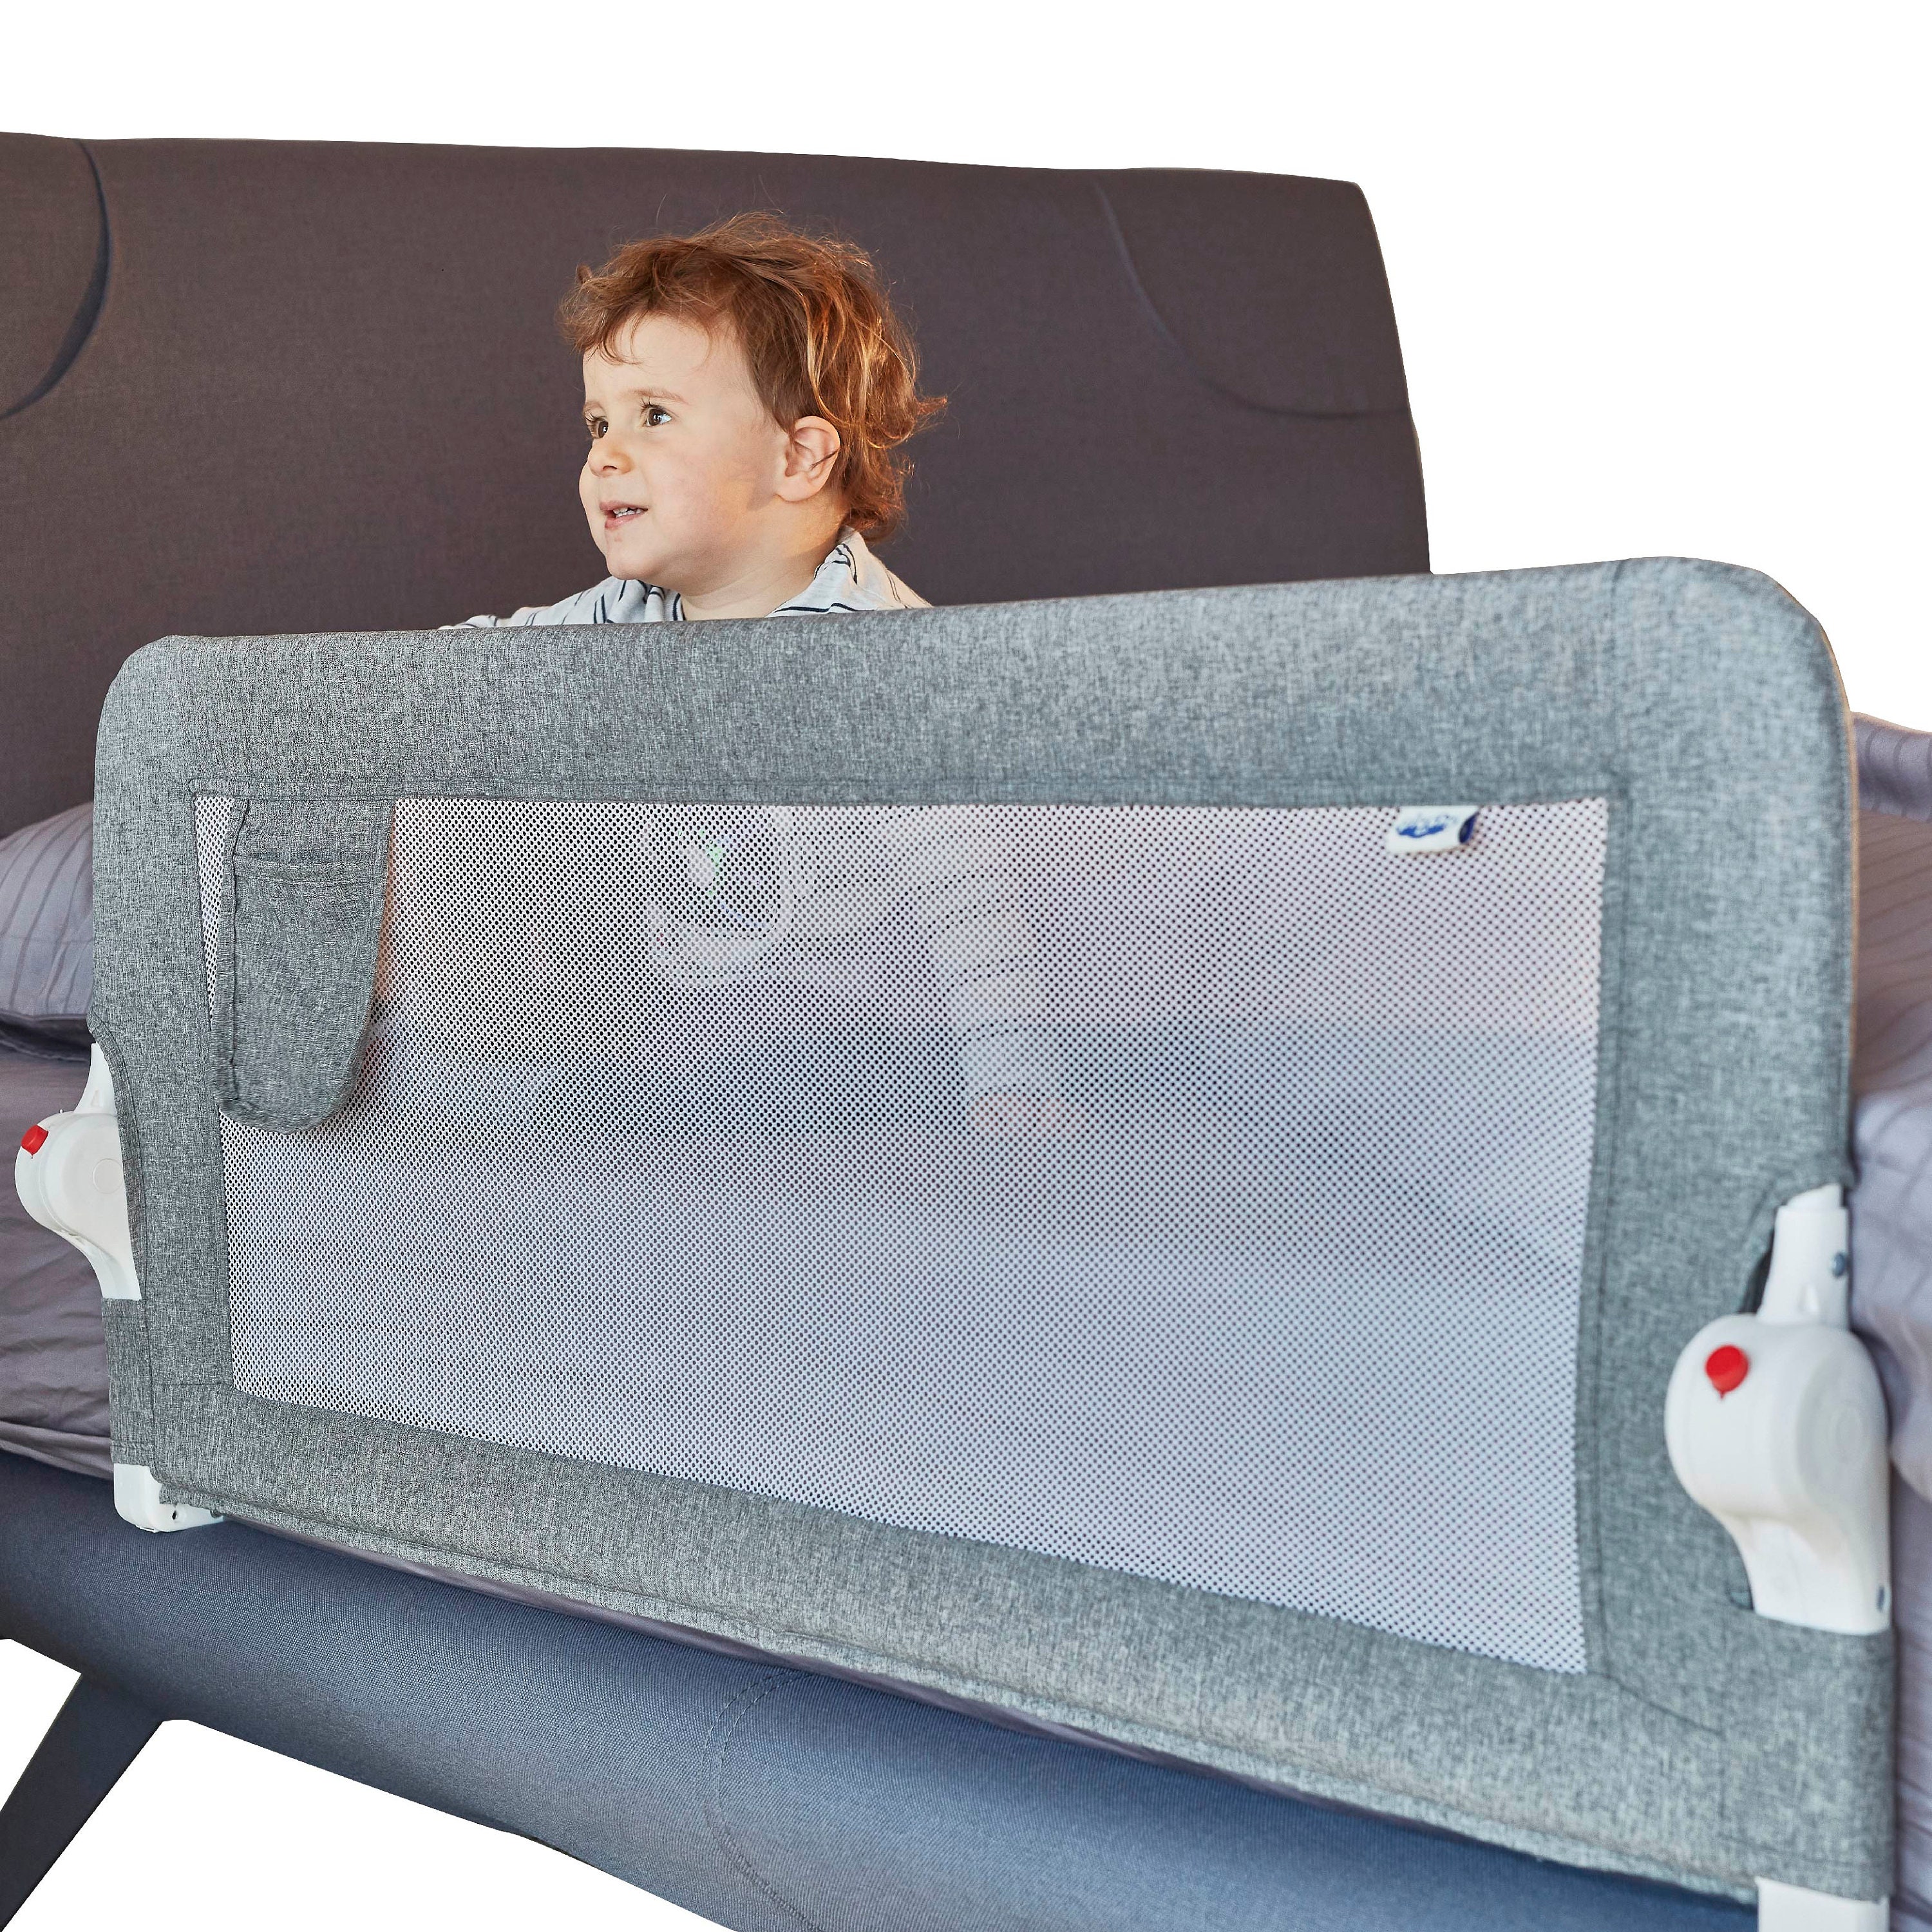 Toddler Airplane Bed Ultimate Airplane Seat Extender for Kids